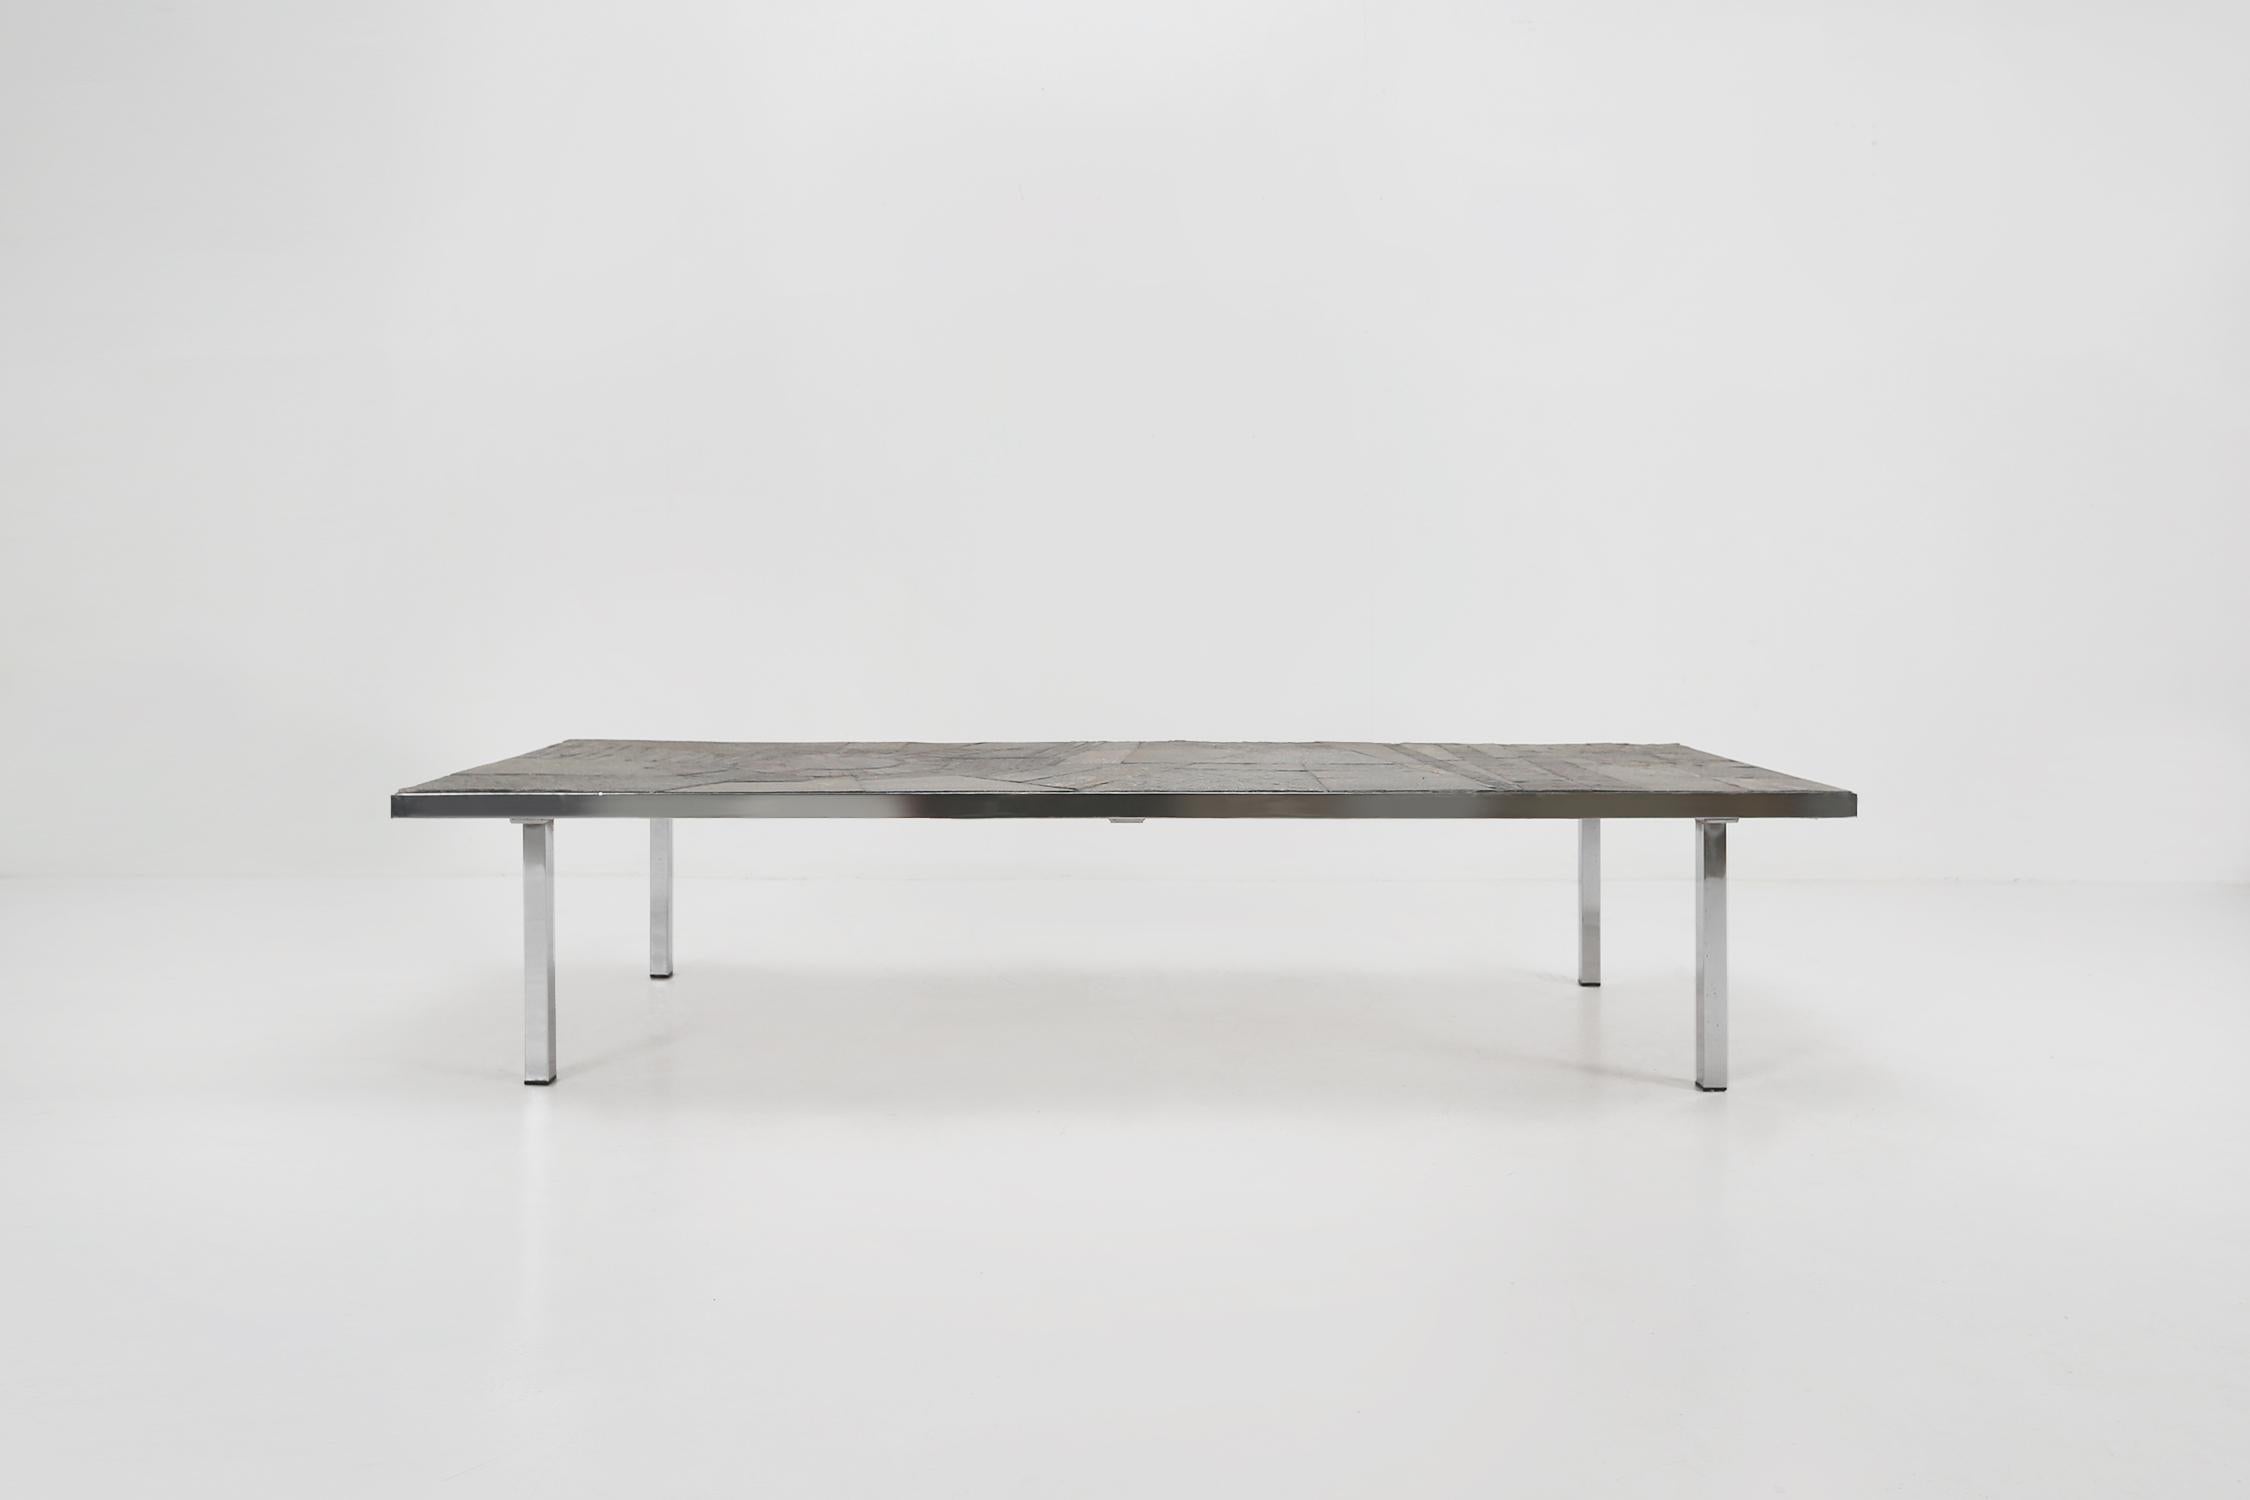 Coffee table by Pia Manu made in Belgium Ca.1960.
Handmade stone top with and chrome base.